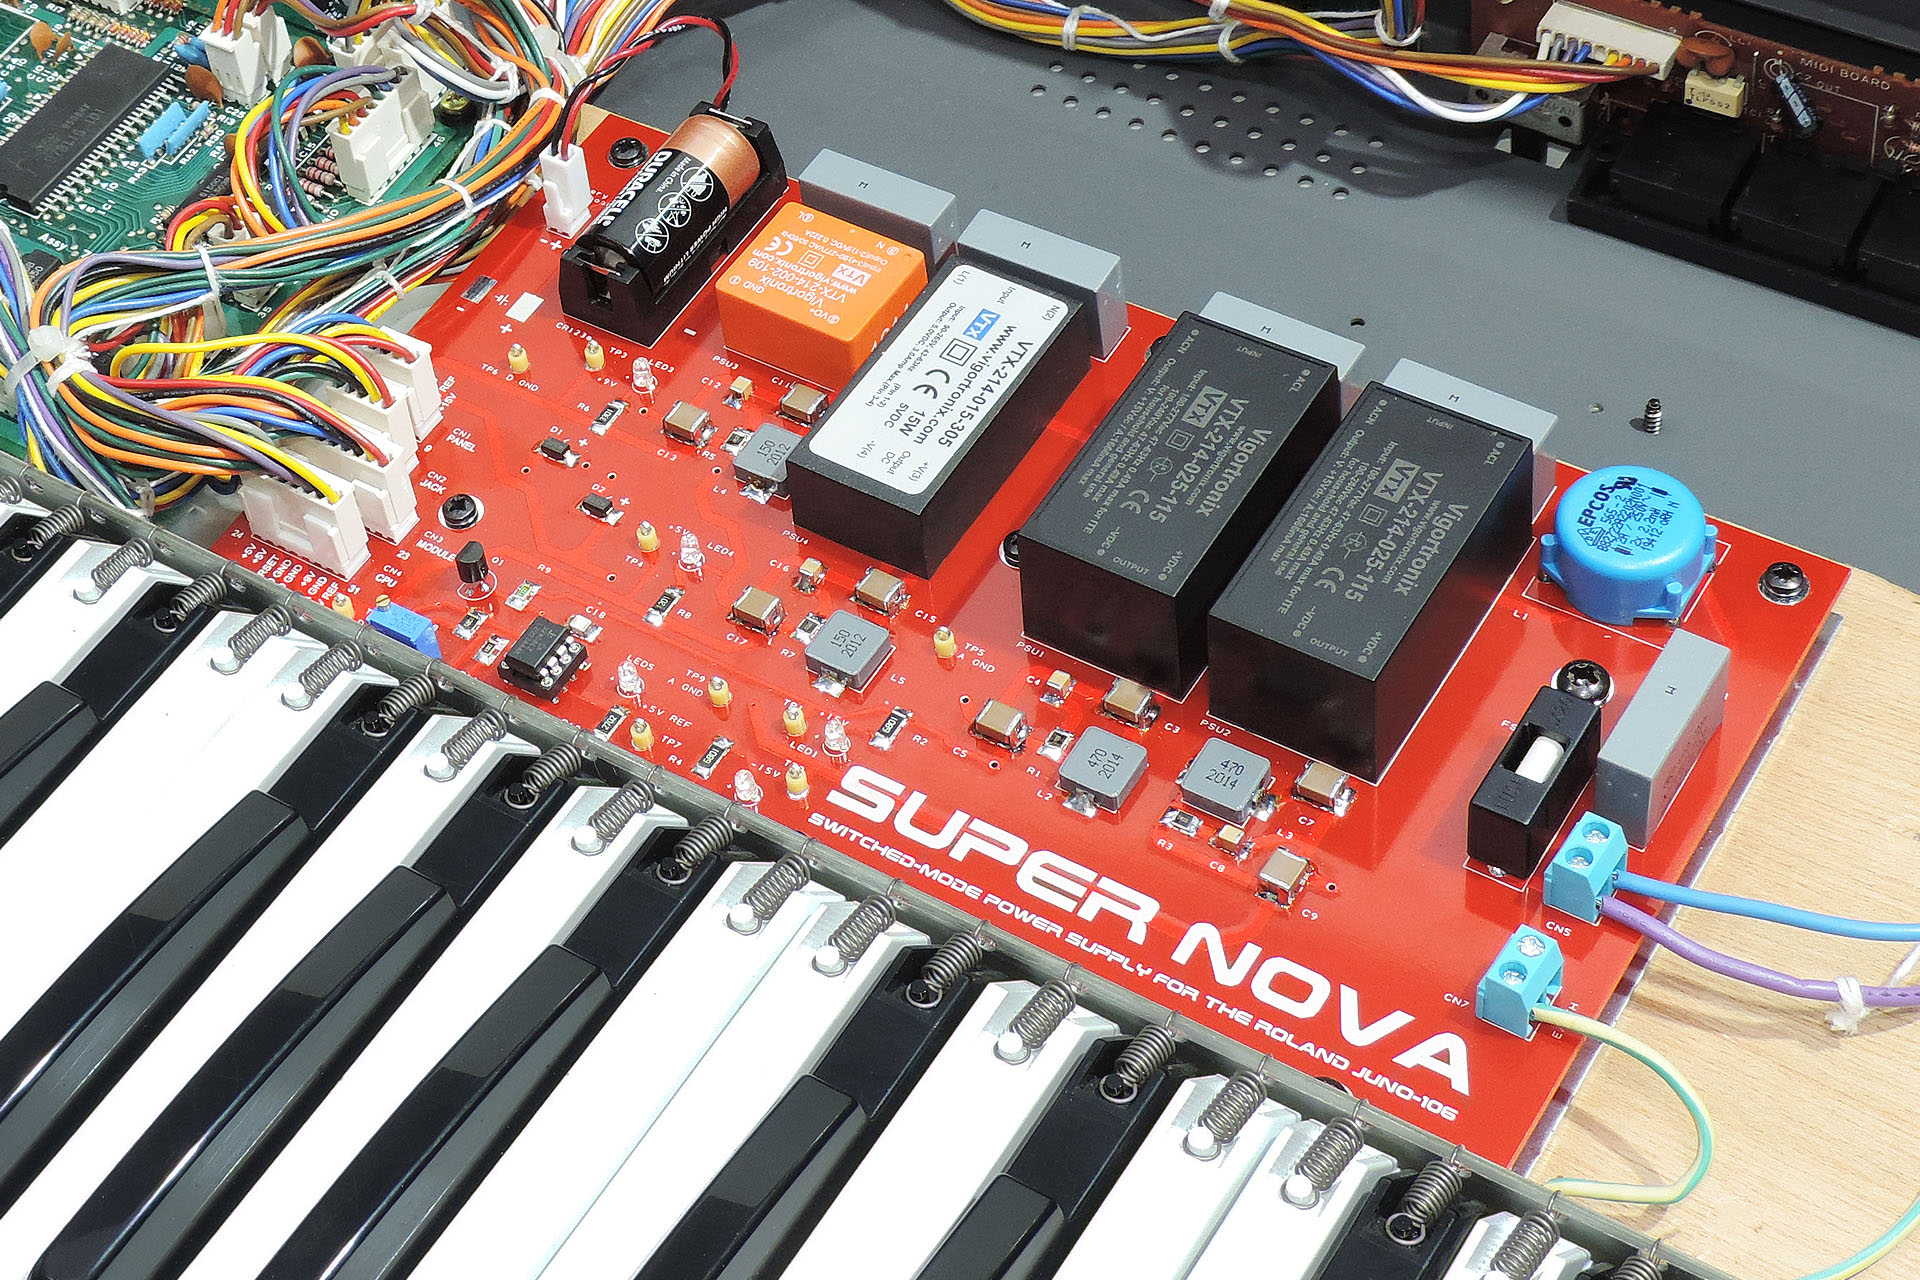 Supernova fits perfectly into the Juno-106